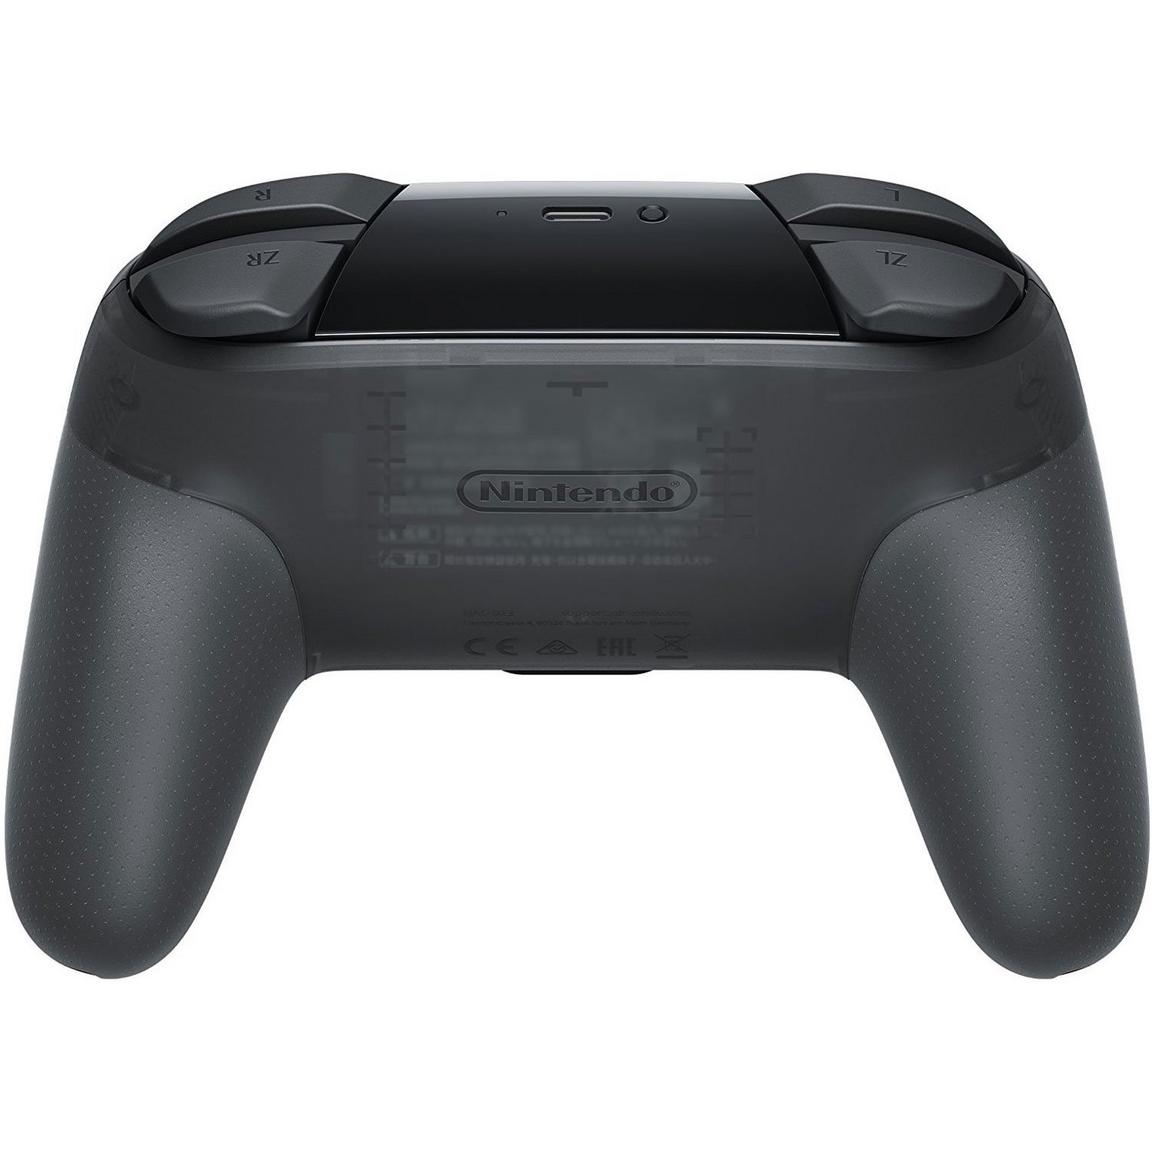 GameSir T4 Pro, the Replacement for Nintendo Switch, Switch Pro Controller